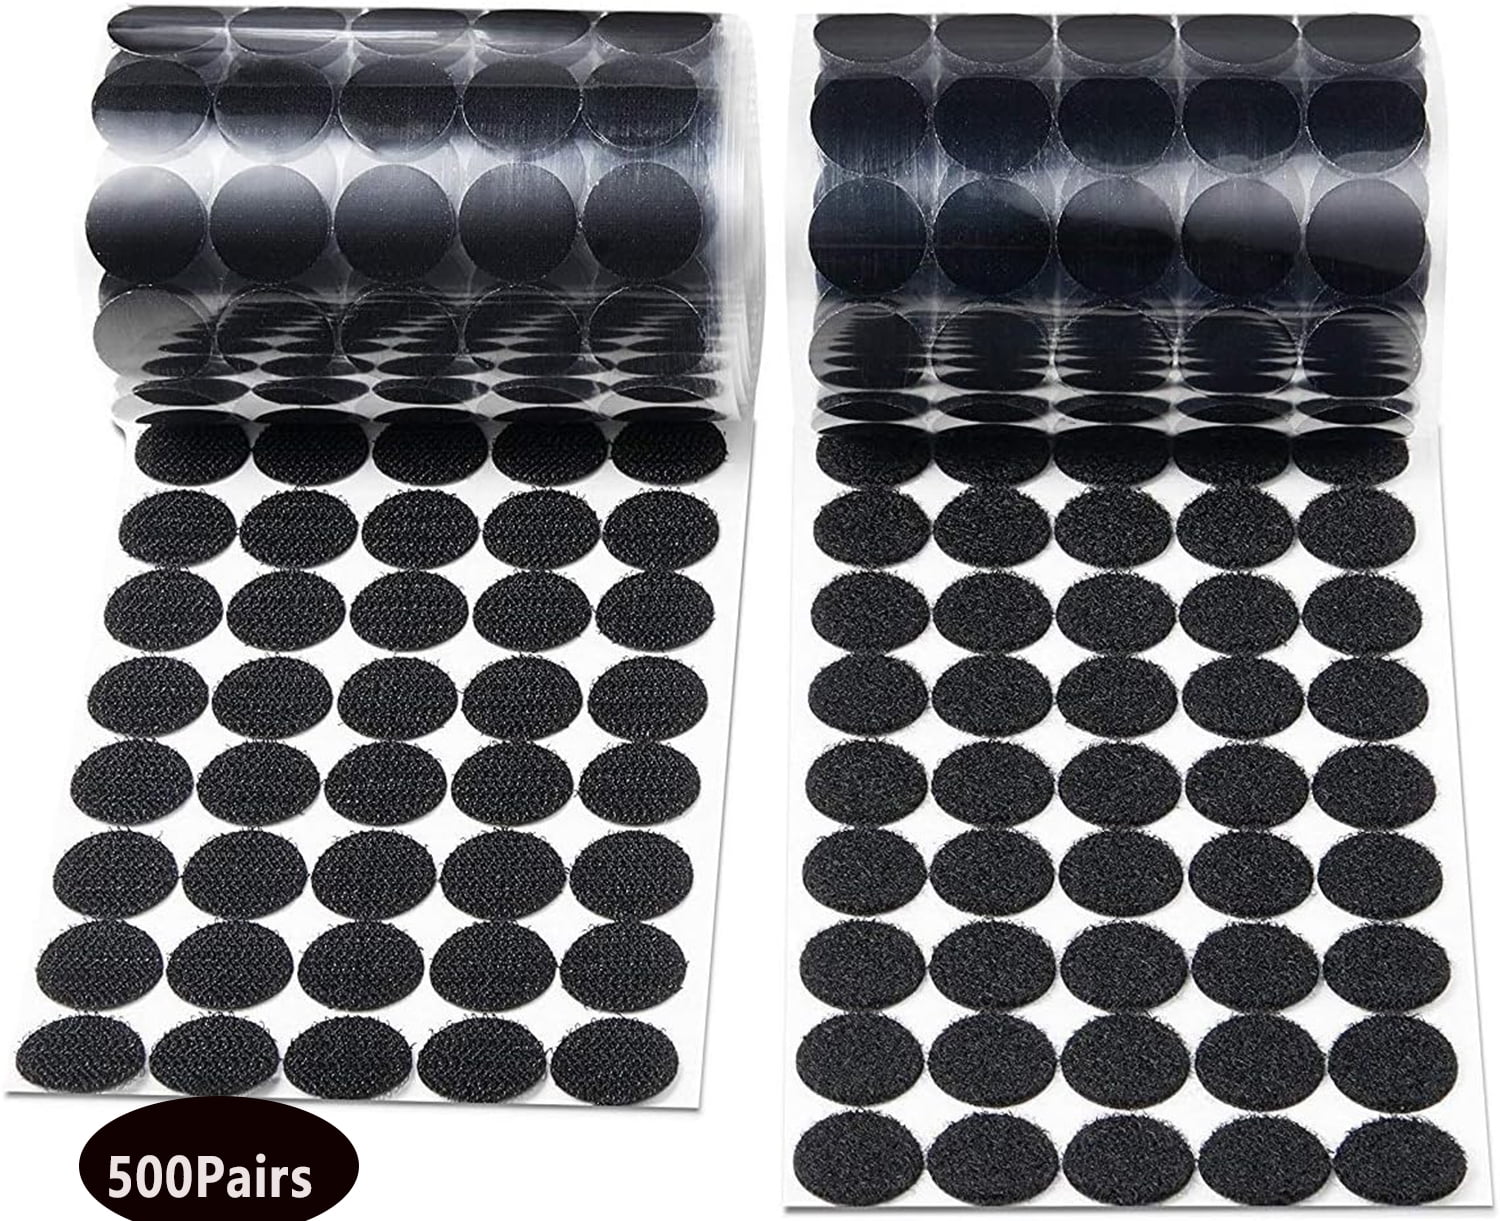 Velcro Dots with Adhesive for Classroom (300pk) - $7.99 — Save